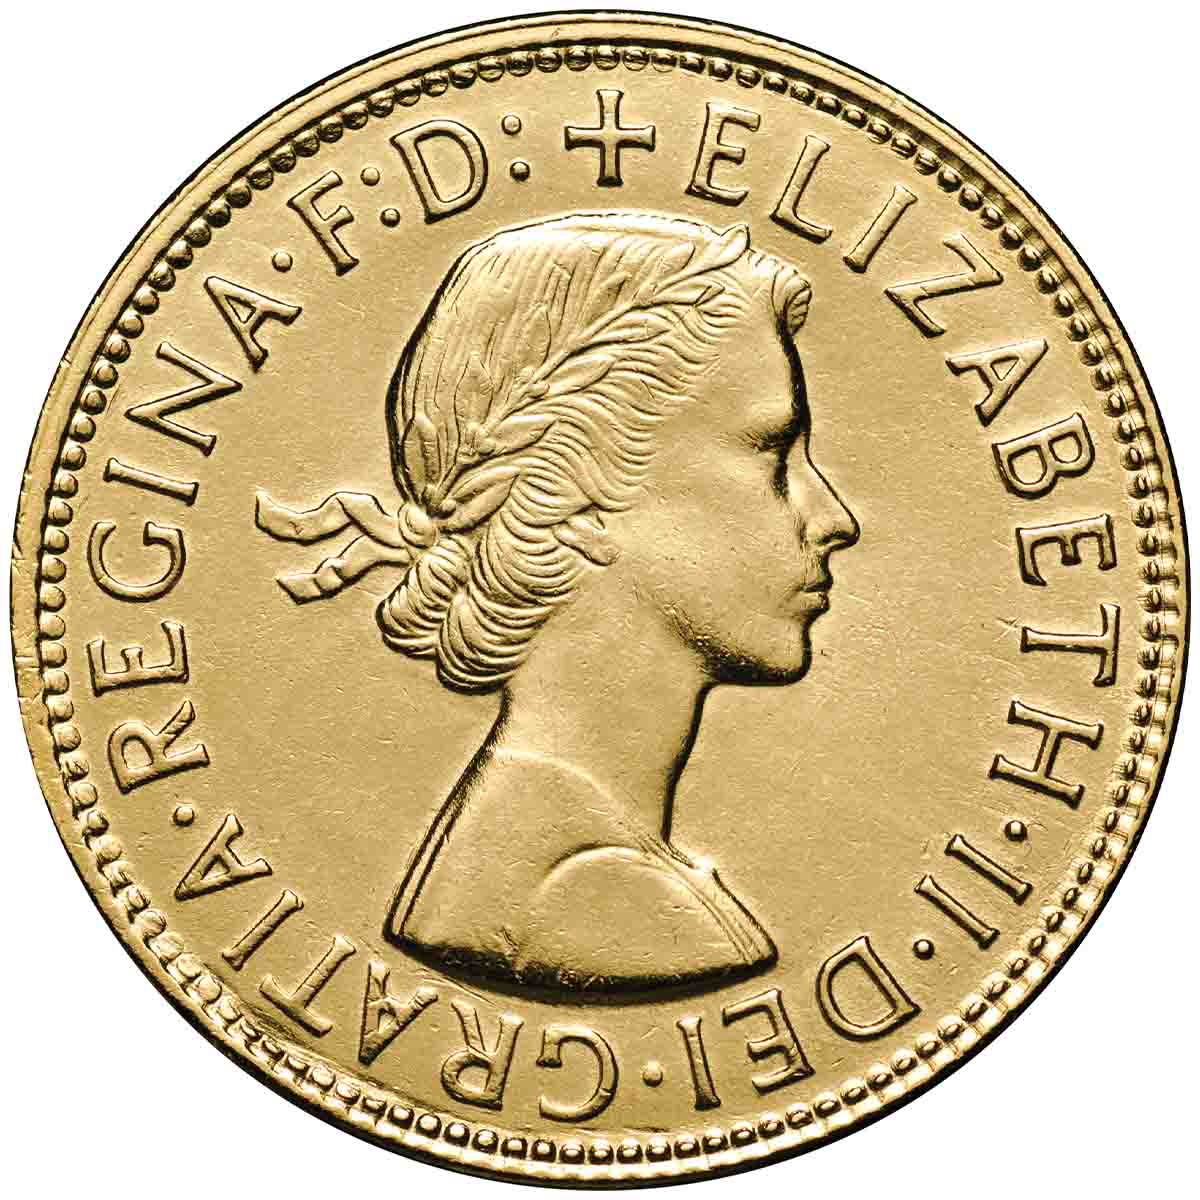 1953-64 Queen Elizabeth II First Portrait Gold Plated Penny